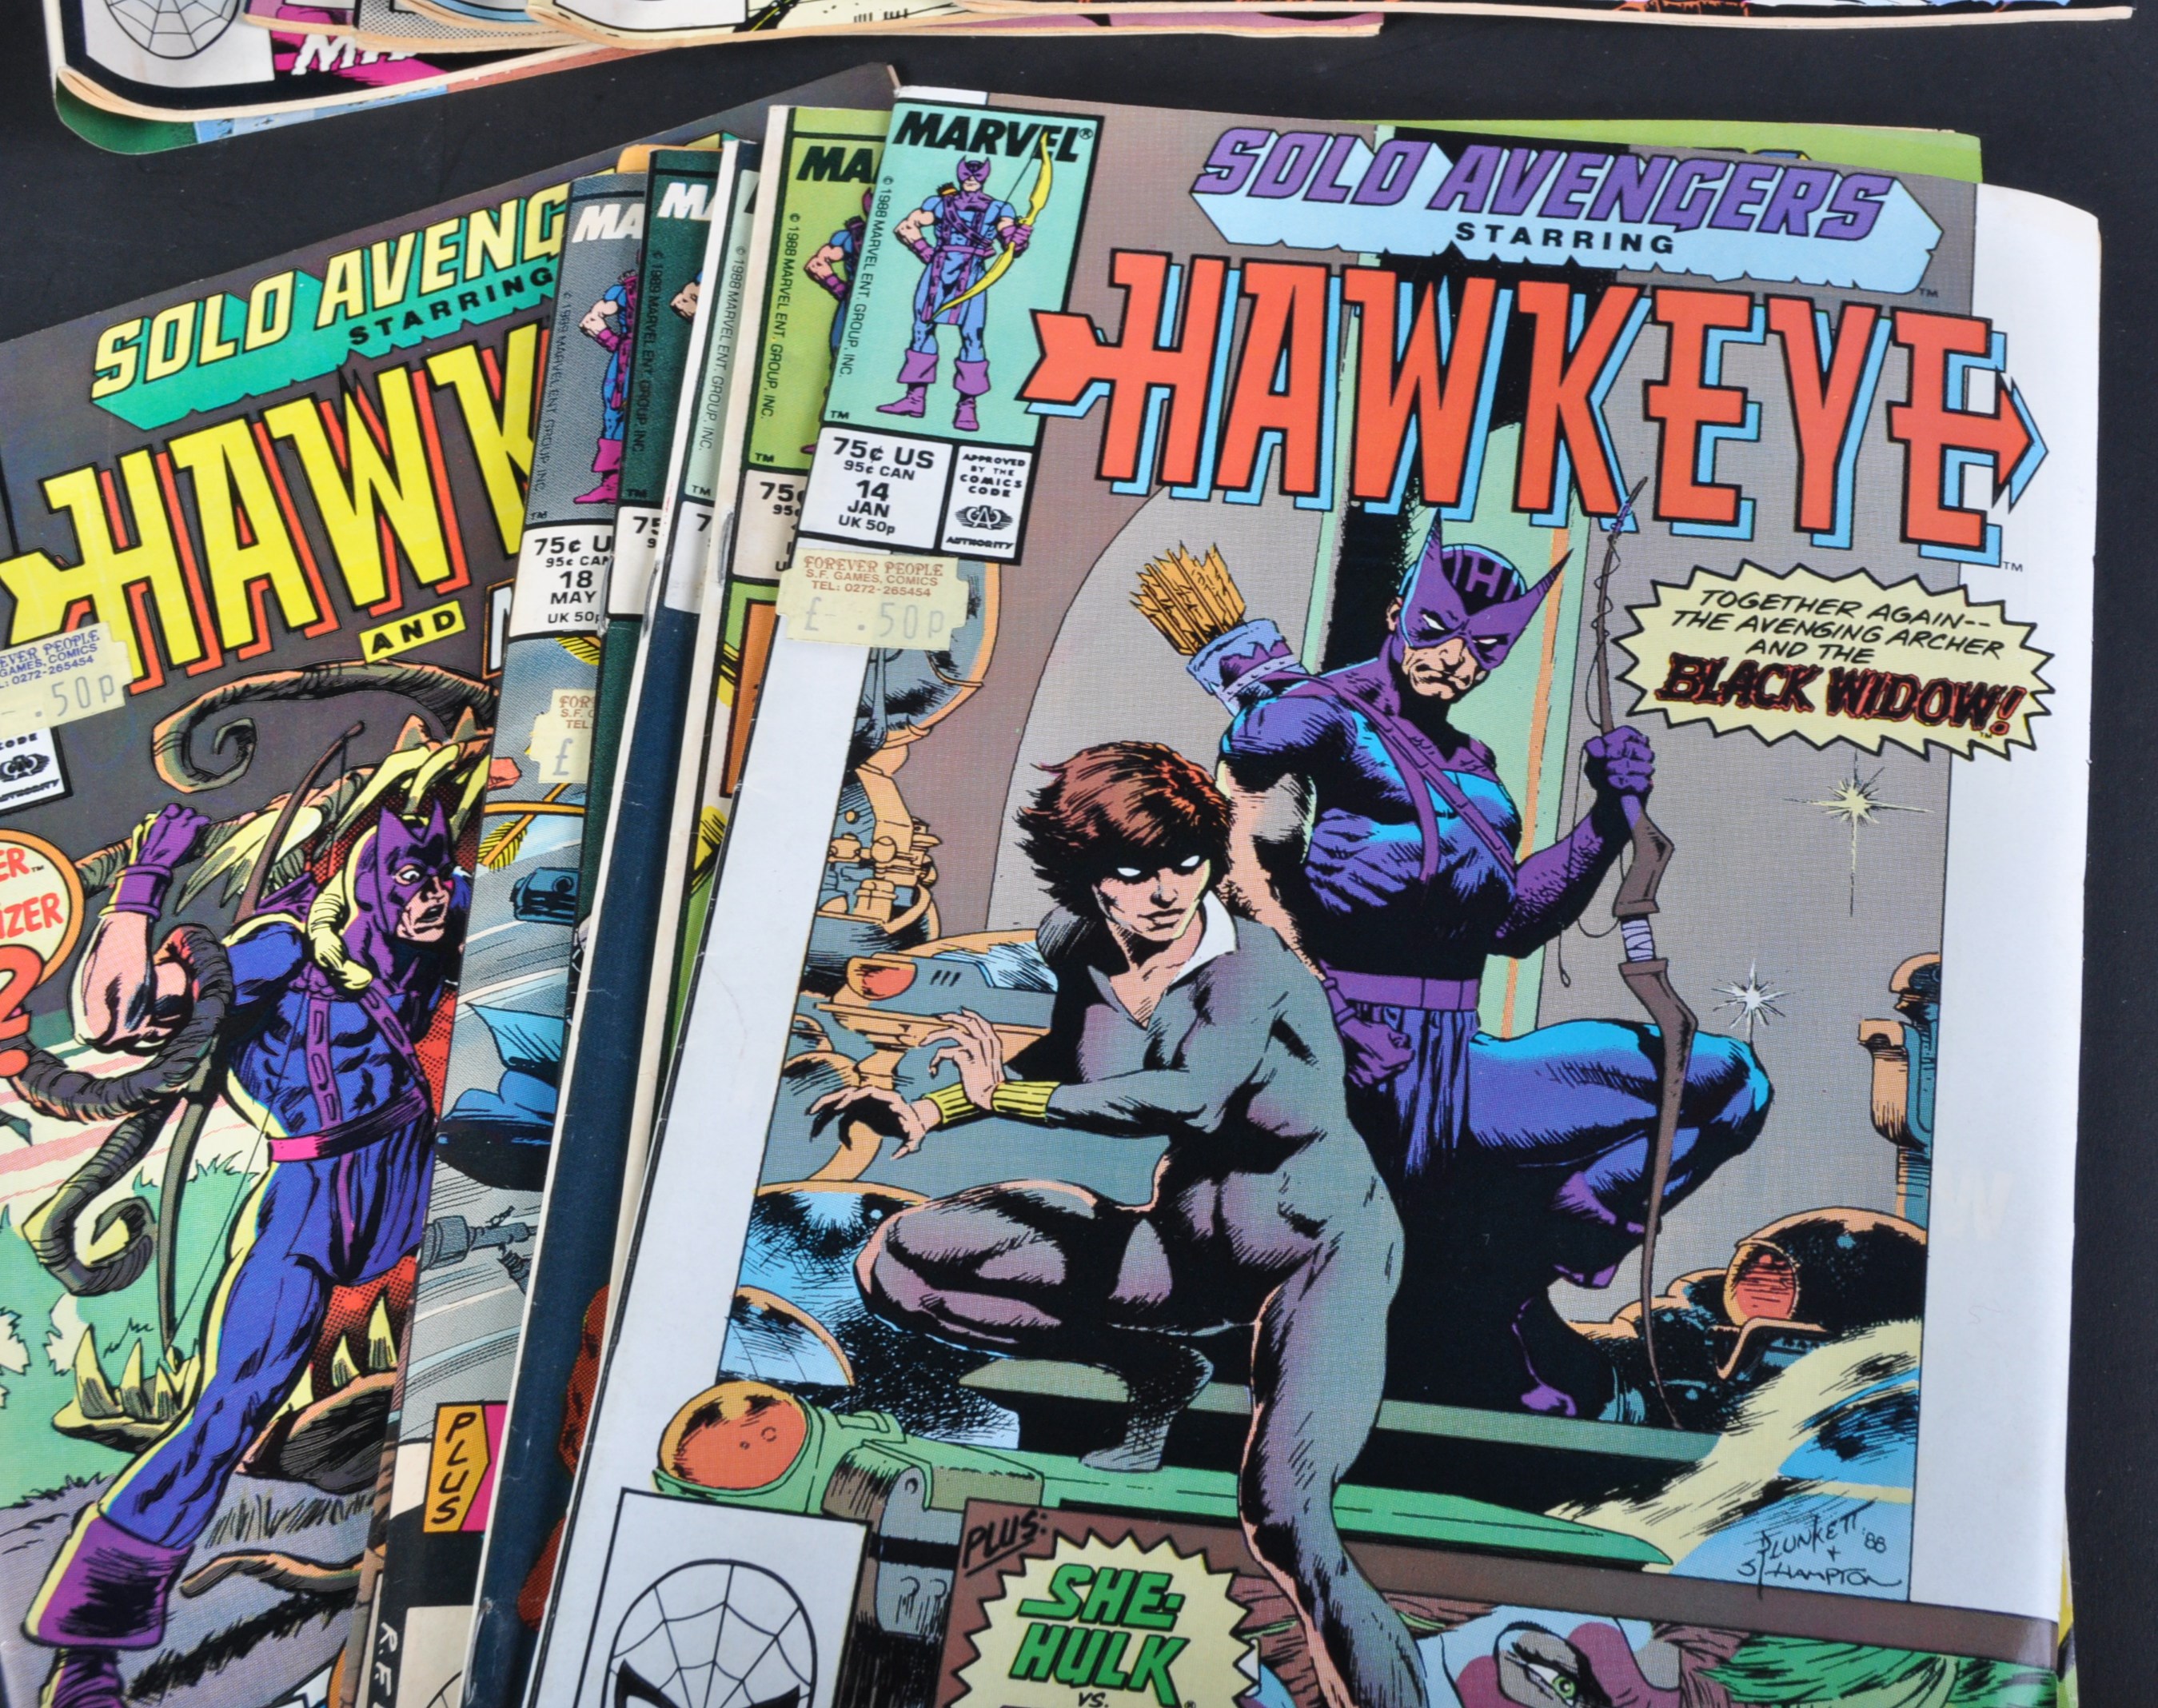 MARVEL COMICS - HAWKEYE - COLLECTION OF VINTAGE COMIC BOOKS - Image 8 of 9